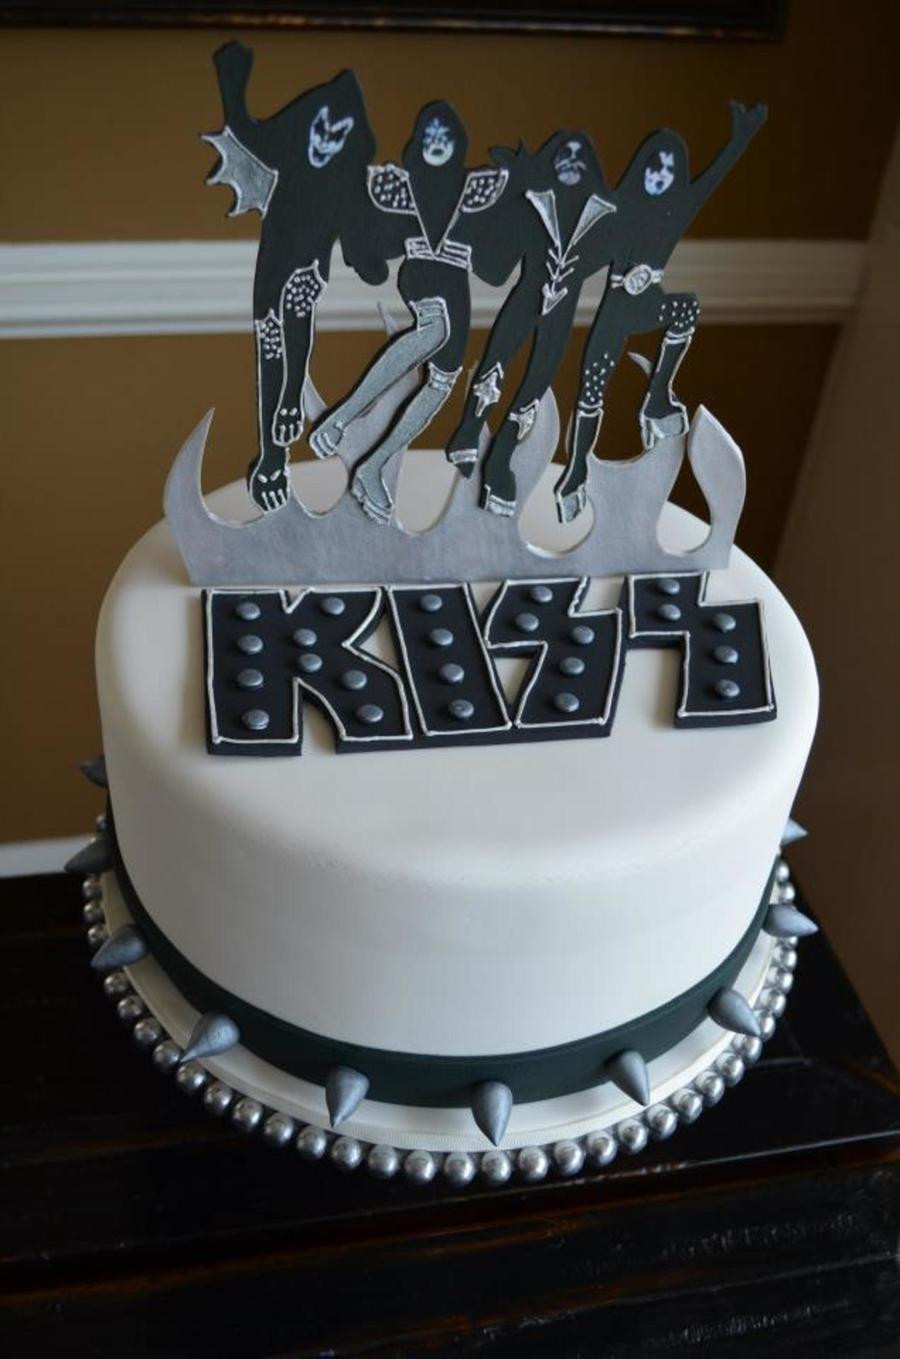 Kiss Birthday Cake
 This Is A Grooms Cake I Made For A Kiss Fan All Hand Cut